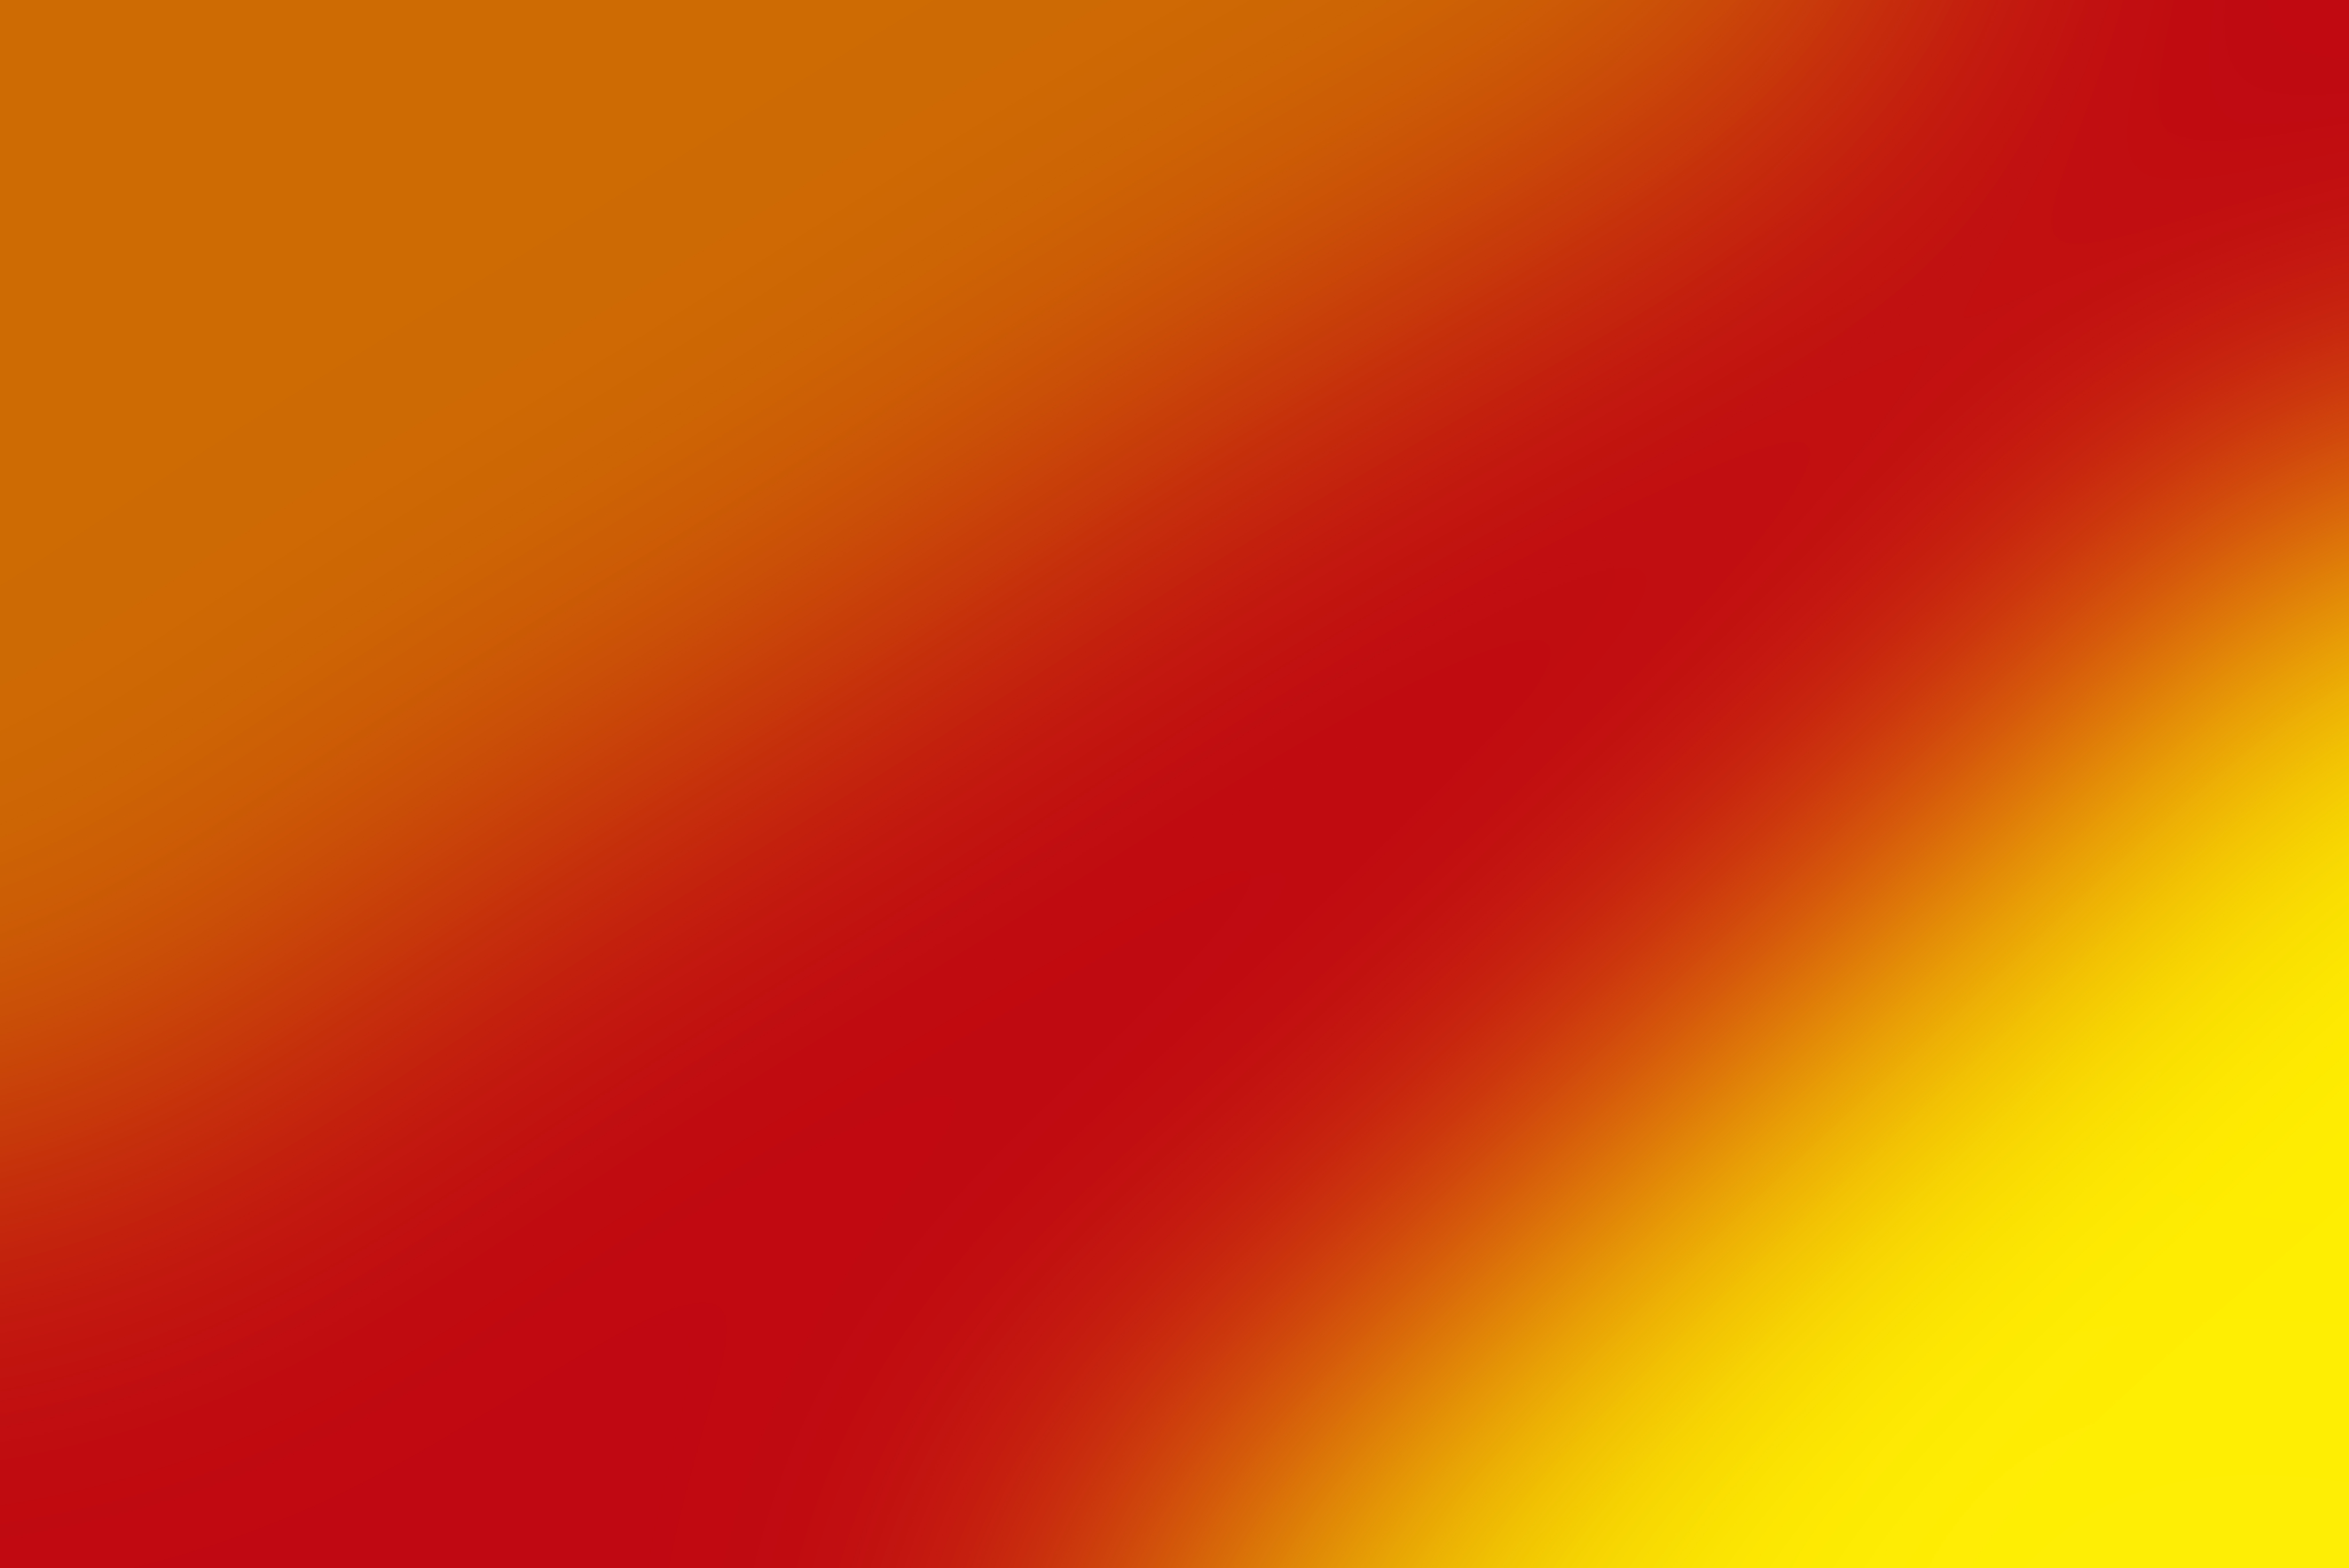 blurred-pop-abstract-background-with-warm-colors-red-orange-and-yellow